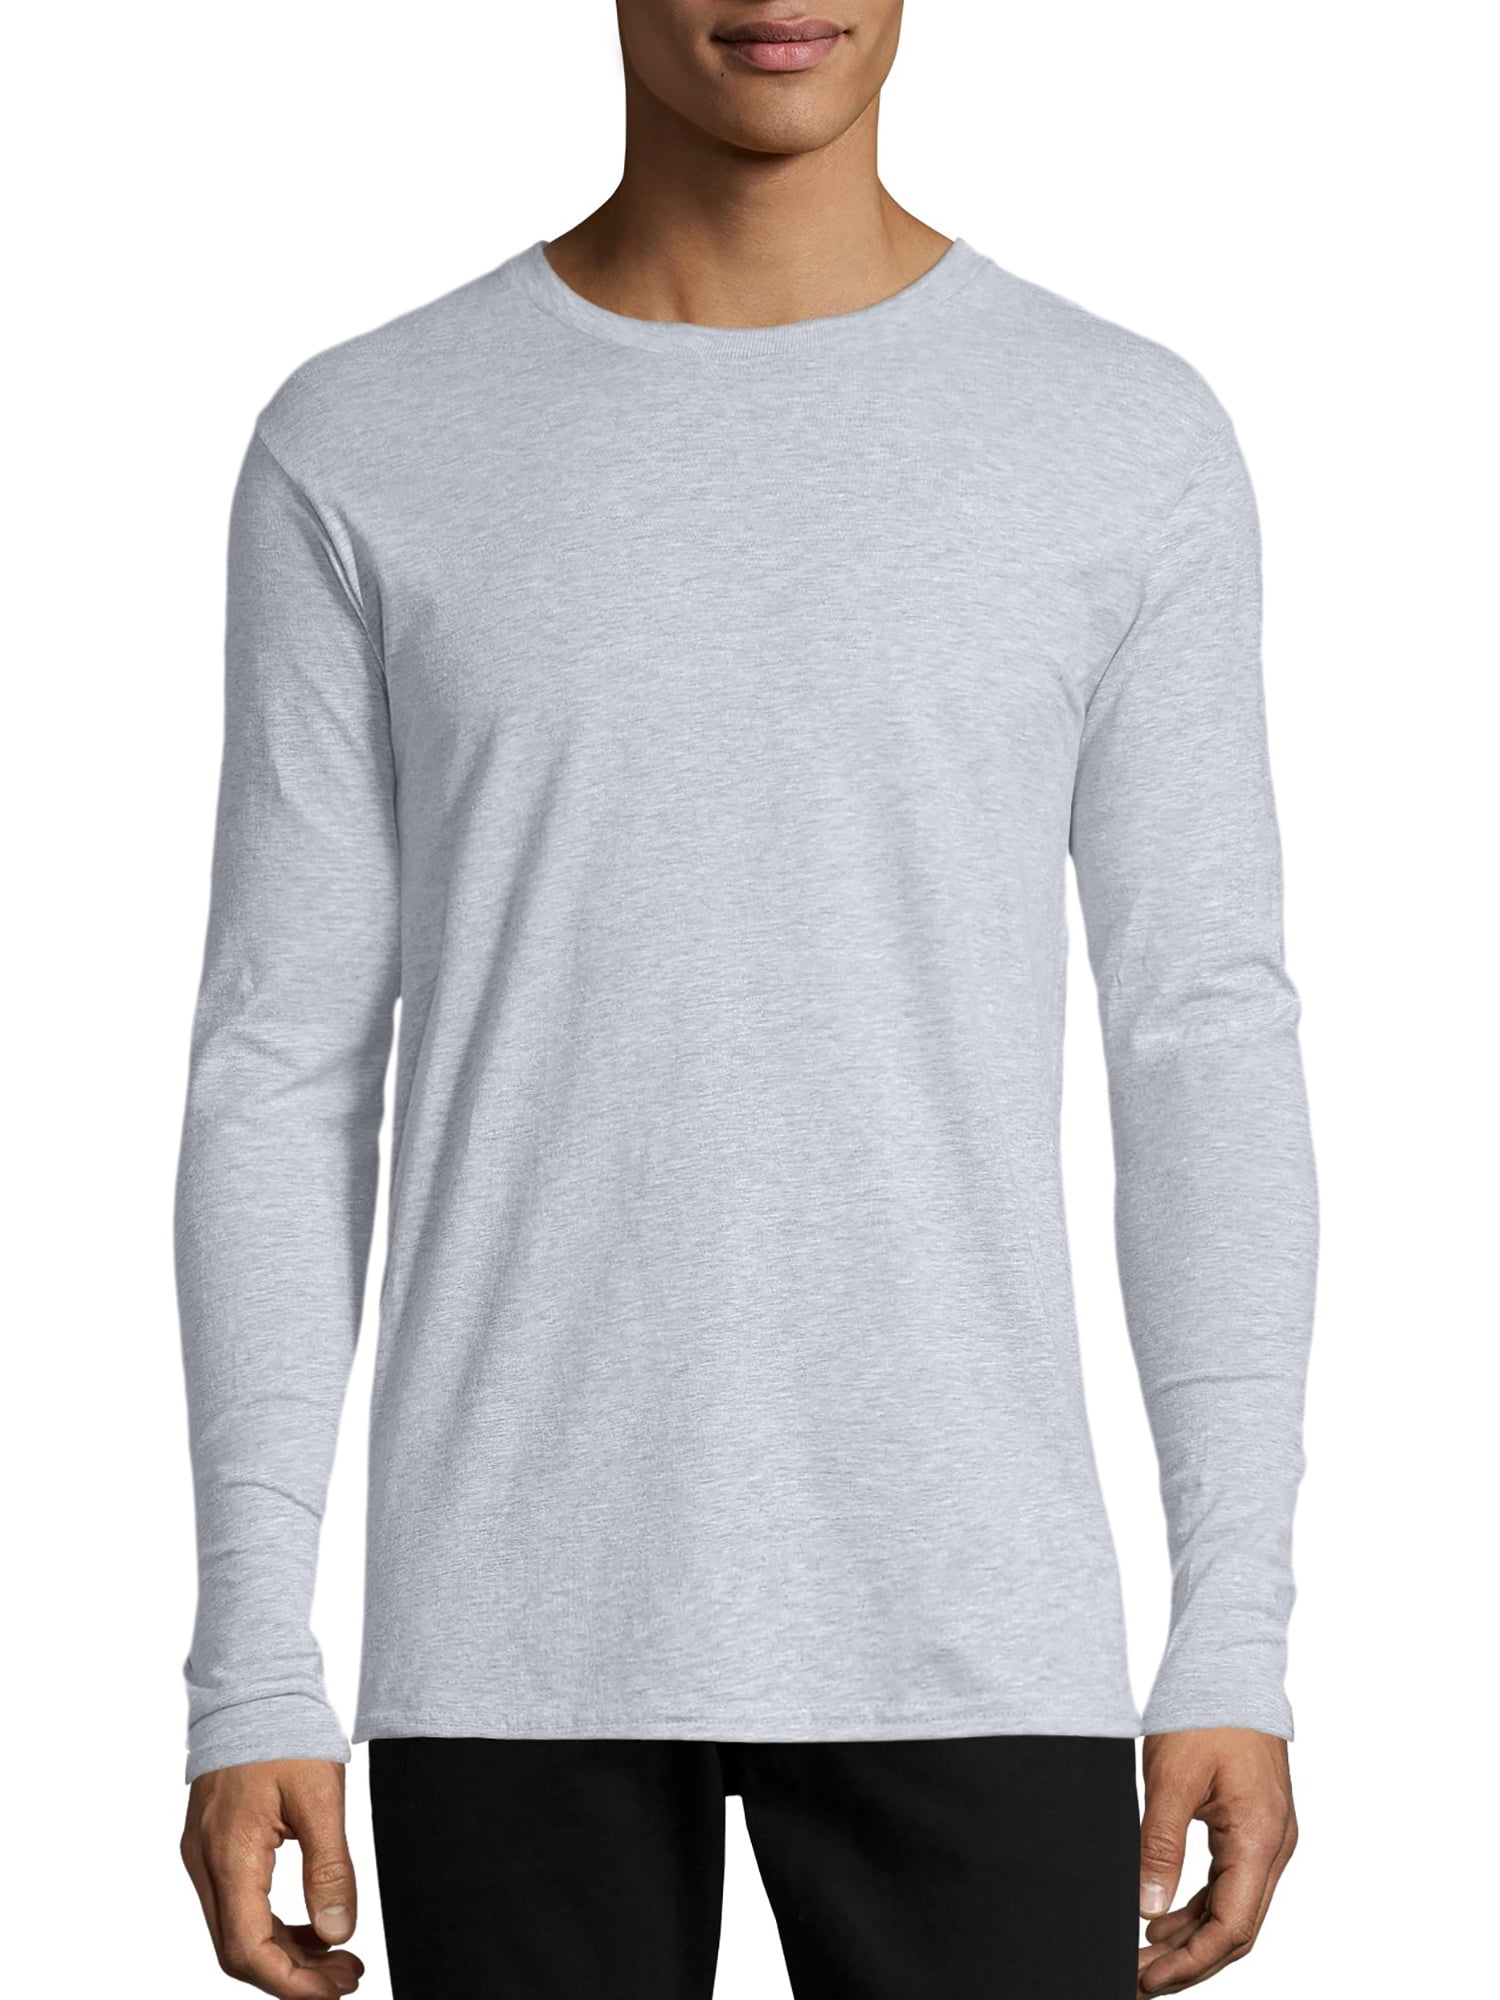 100% Combed Cotton Long sleeve Full Sleeve T Shirts 5 Pack 